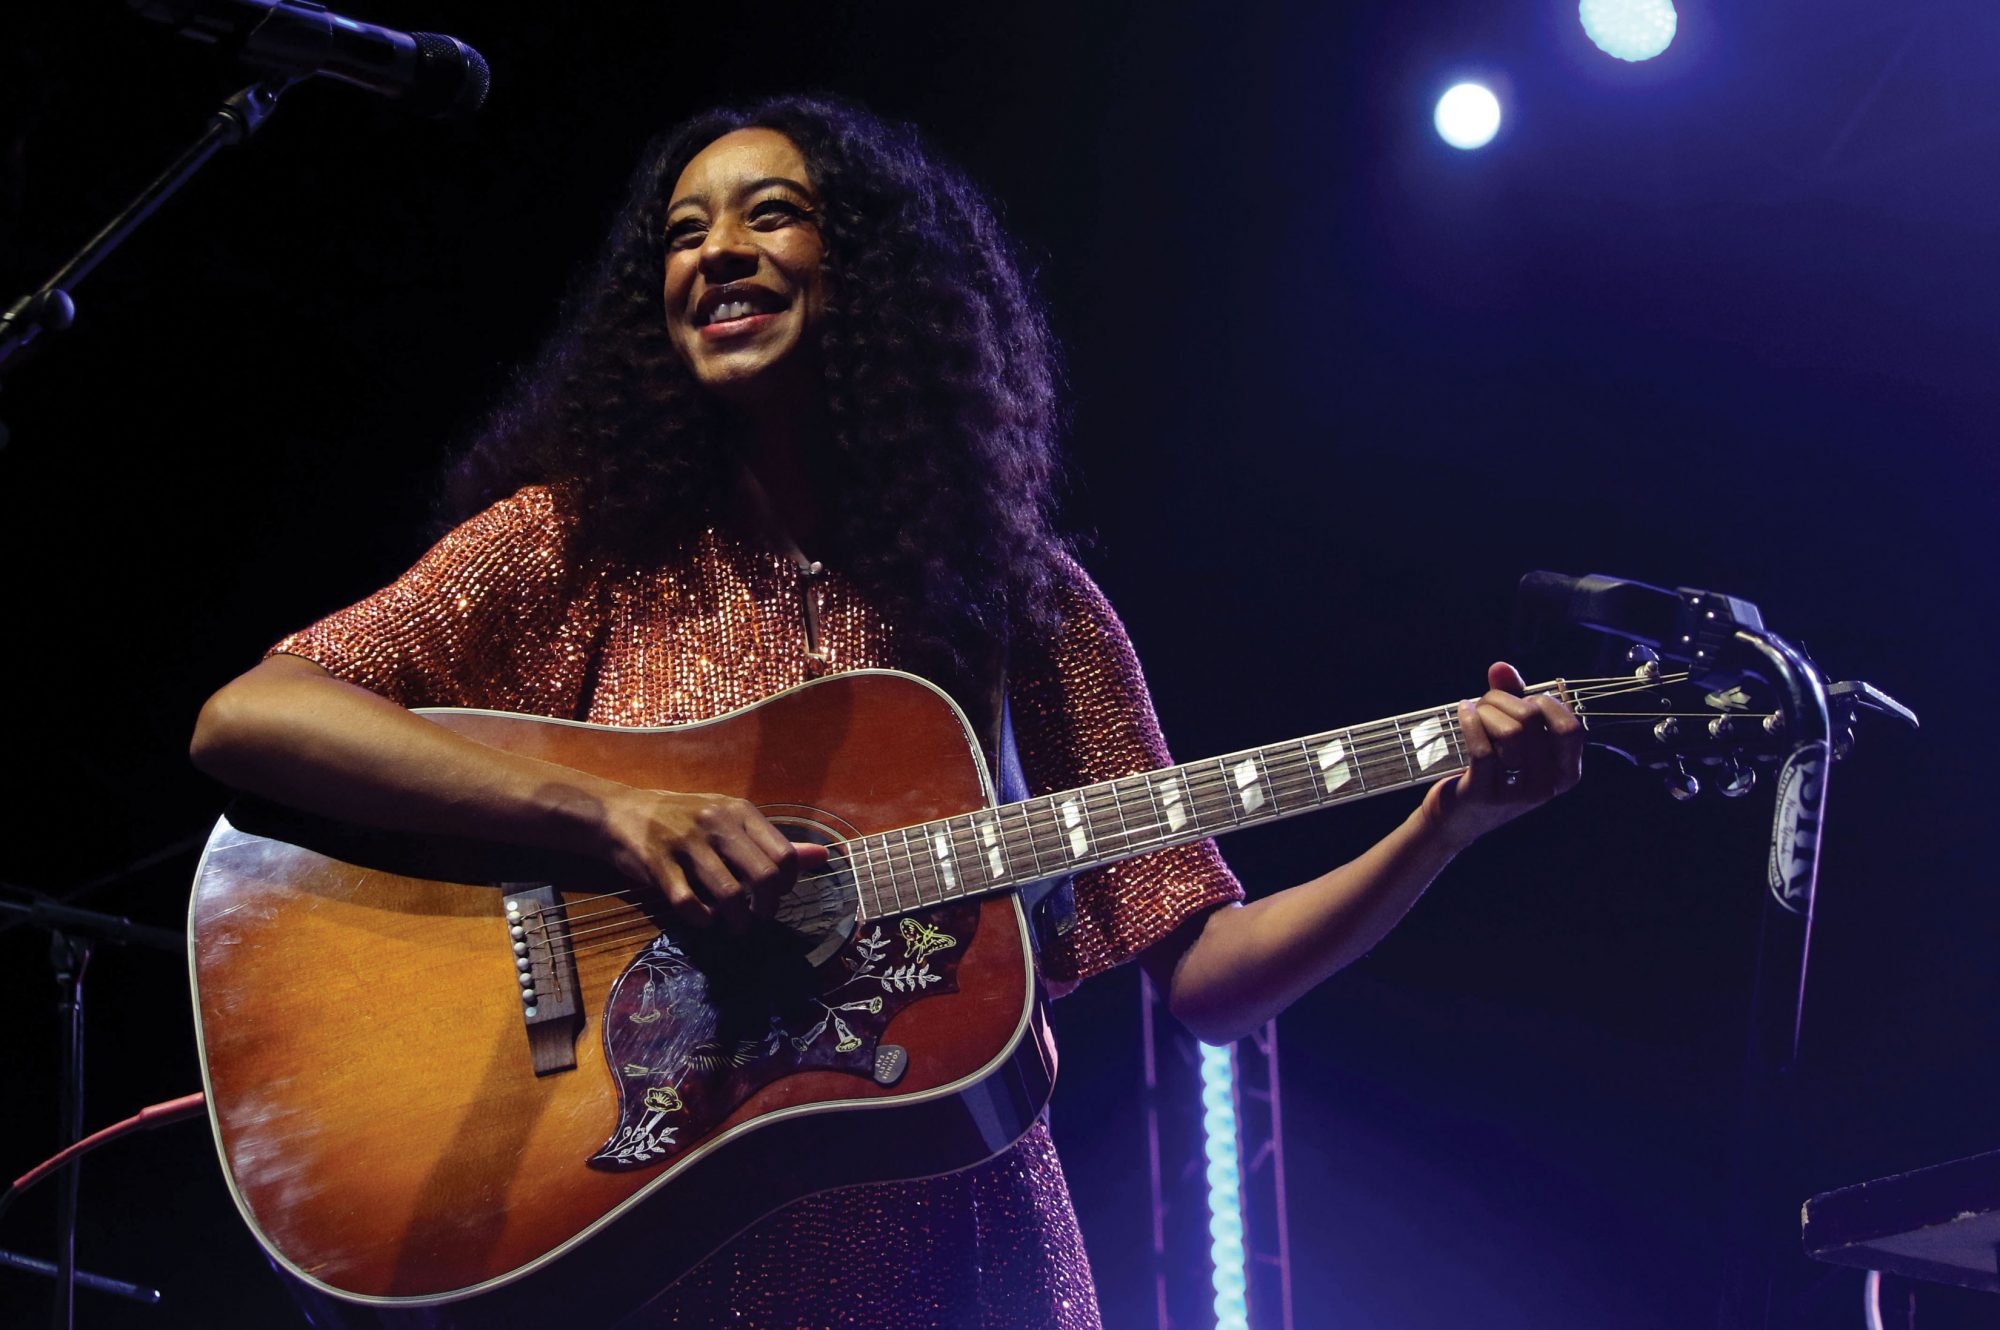 Corinne Bailey Rae
The Grammy winning singer-songwriter of ‘Put Your Records On’ fame received an English degree in 2000 and an Honorary Doctor of Music in 2011.
Photo credit: © Nancy Kaszerman/ZUMA Wire
